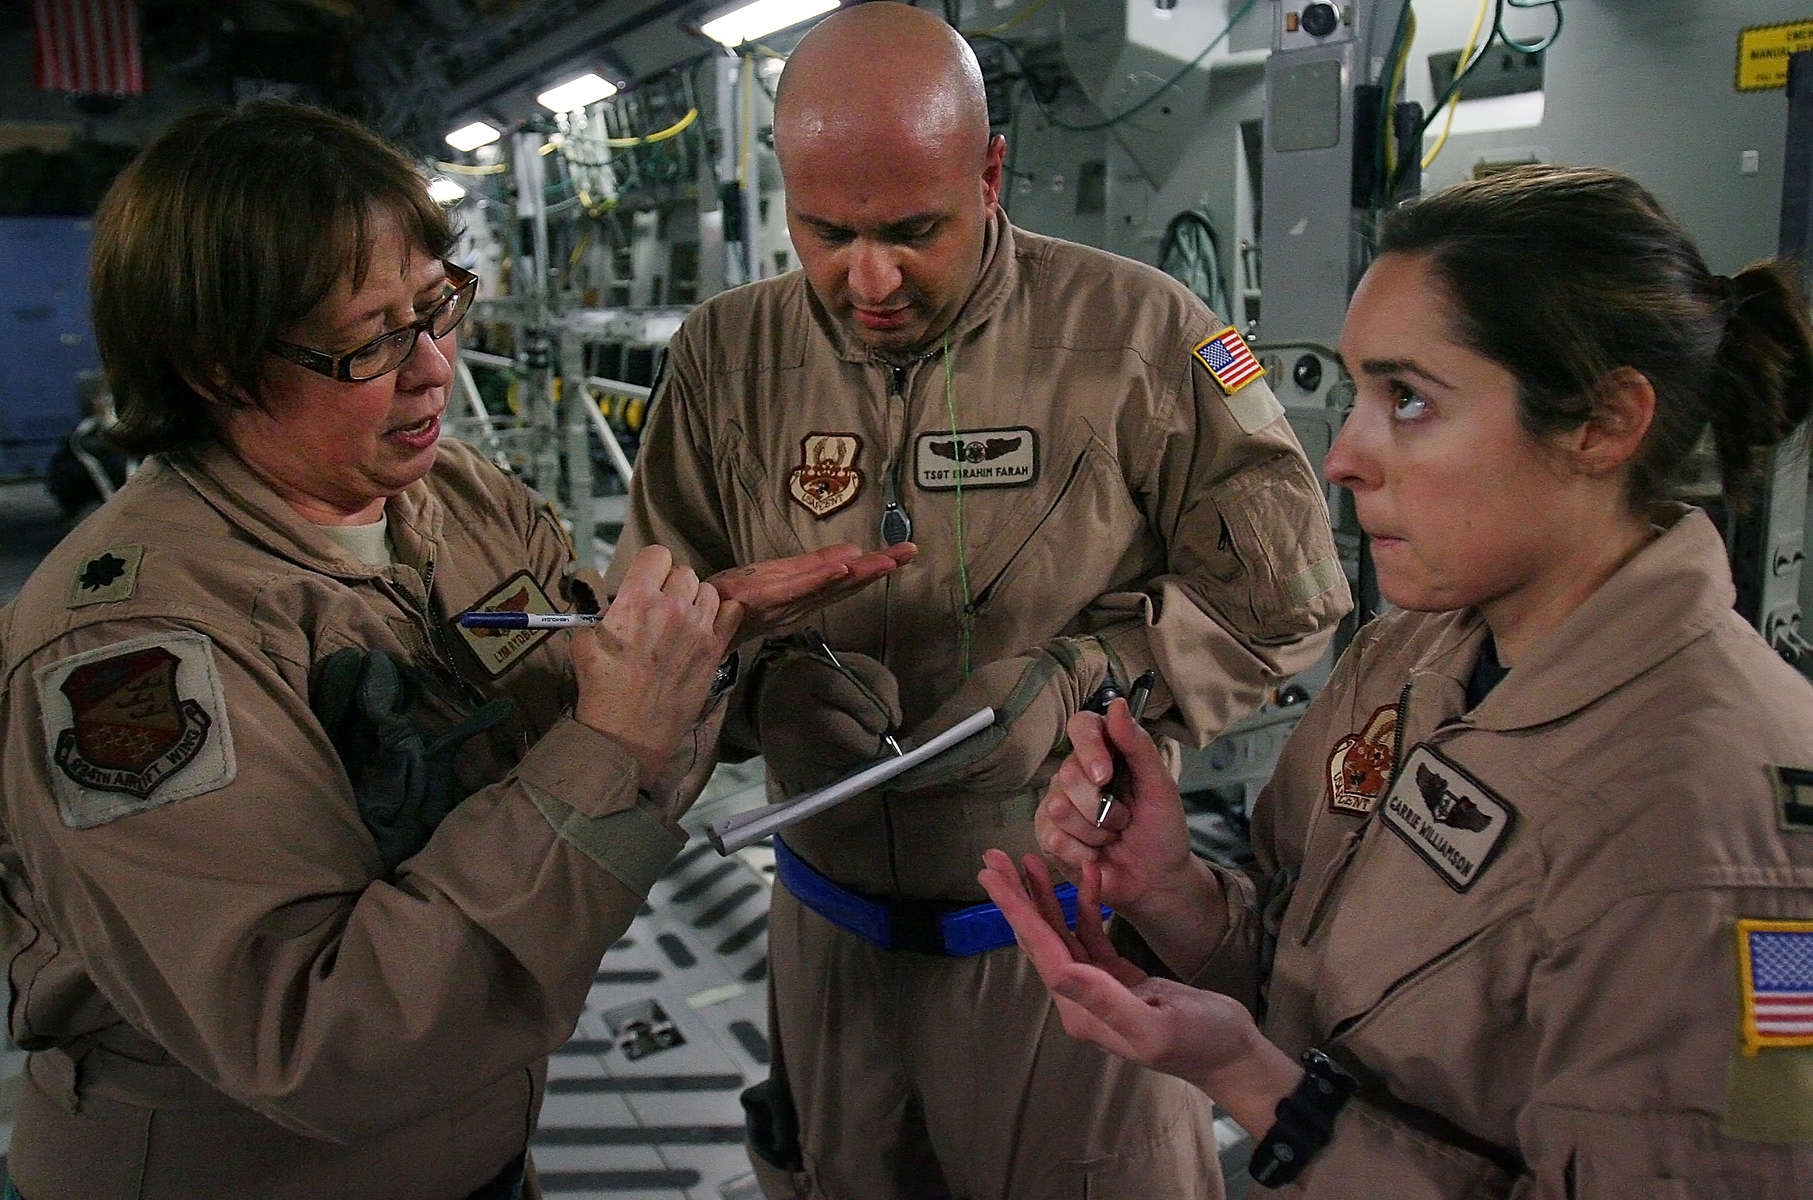 Lt. Col. Lynn Rydberg from Minneapolis Air Reserve Station, left, Medical Technician Ibrahim Farah and Medical Technician Cpt. Carrie Williamson from Peterson Air Force Base in Colorado calculate by writing on their hands how many litters to set up for inside the March Air Reserve Base Globemaster C-17. The aircraft's cargo bay is transformed into an air hospital, moving wounded warriors from Bagram Air Force Base in Afghanistan to Ramstein Air Force Base in Germany for more medical care.(The Press-Enterprise/ Mark Zaleski)